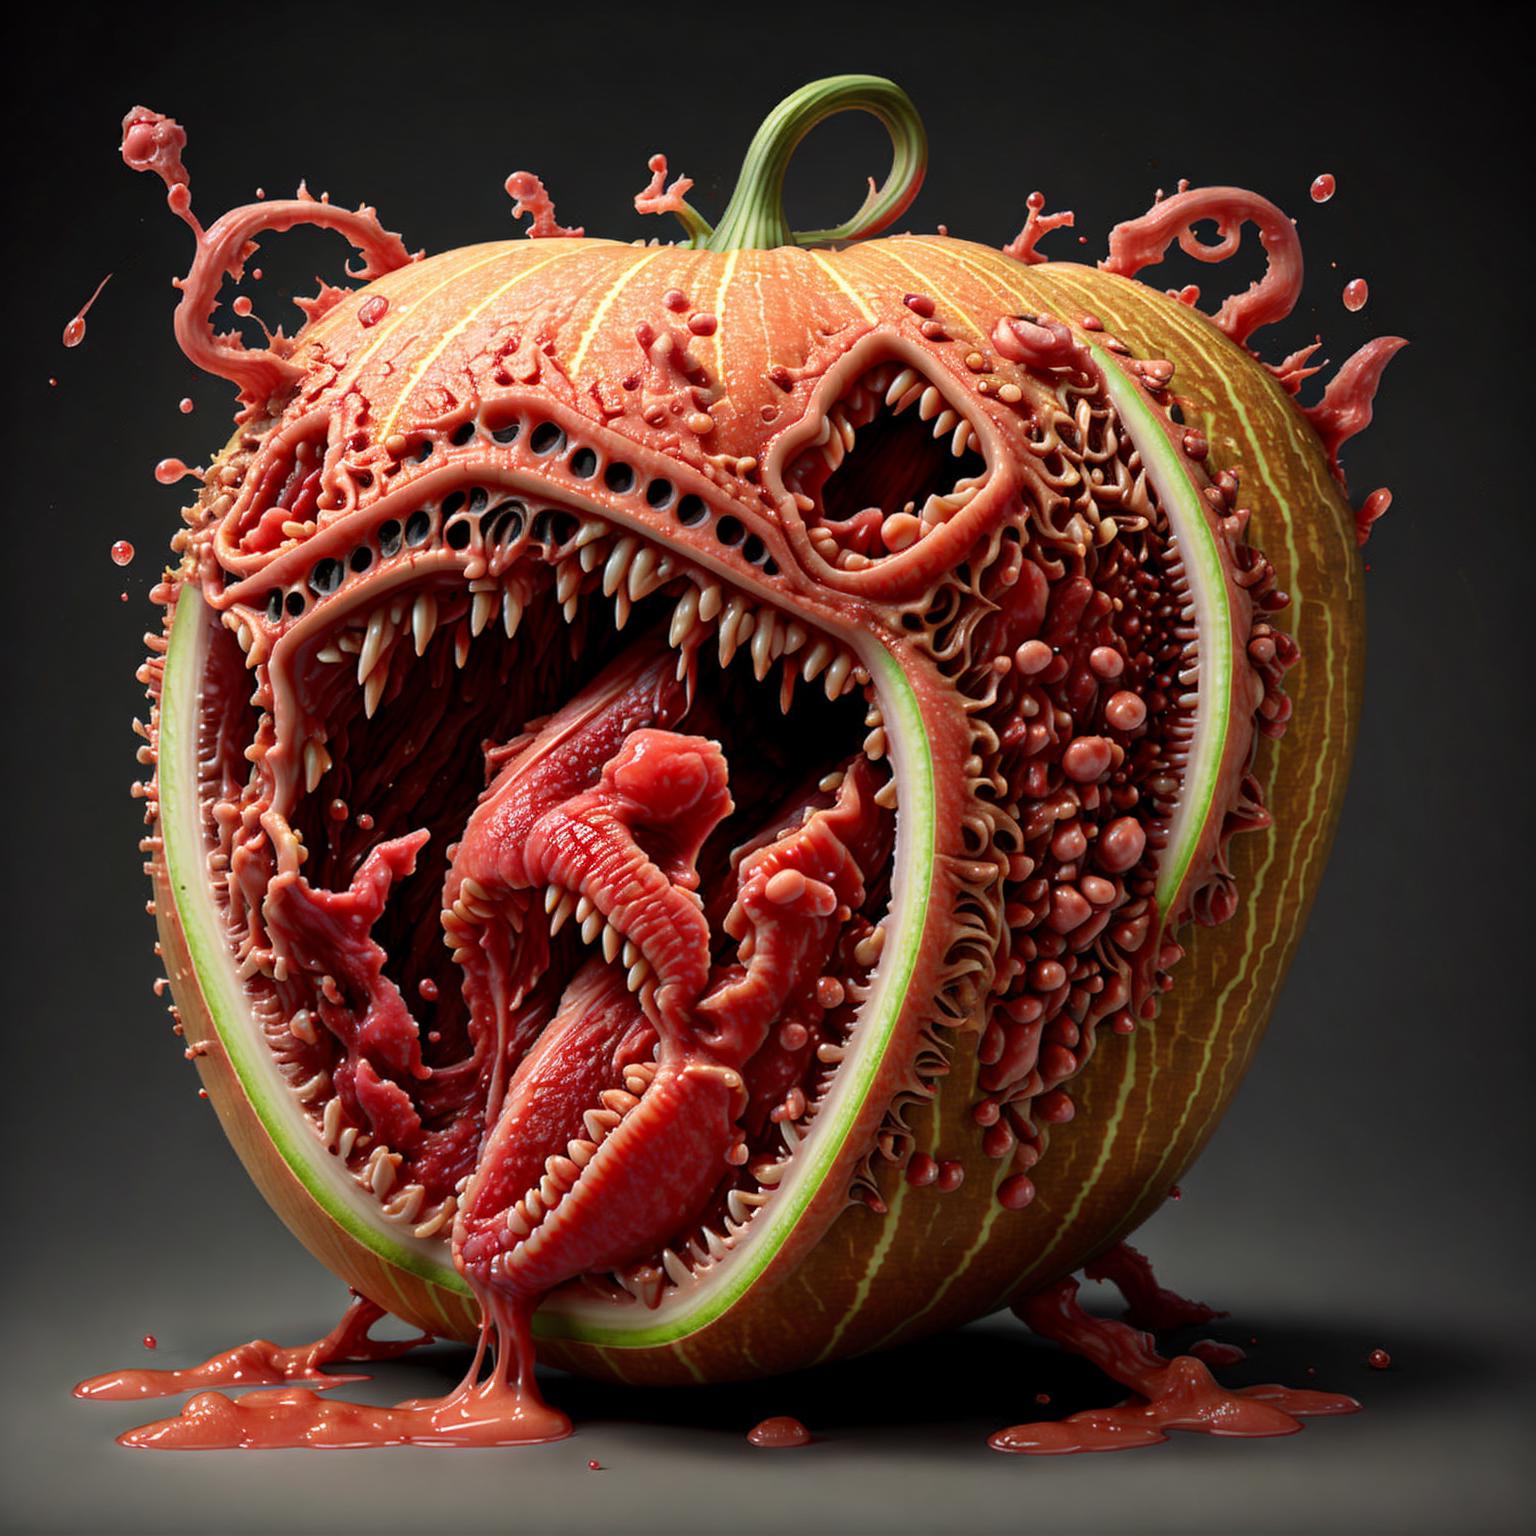 Fruity Nightmare image by woobly